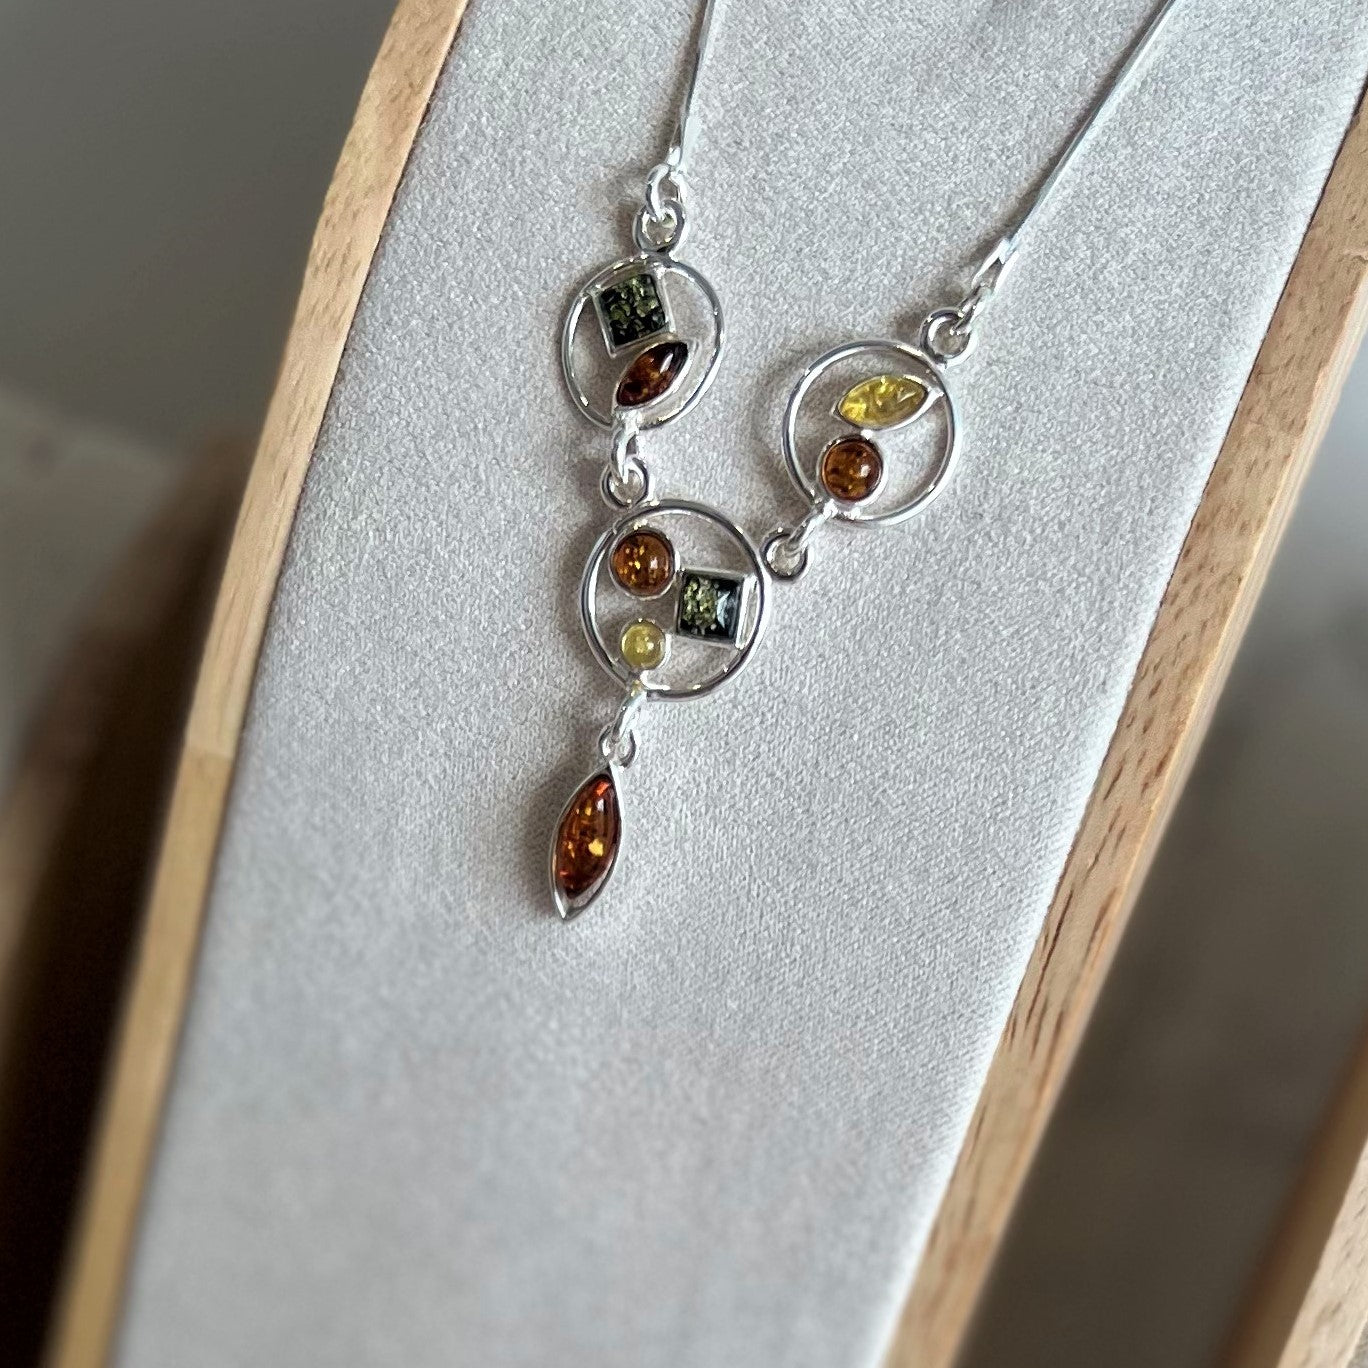 925 Sterling Silver & Genuine Baltic Amber Multi Stones Modern Necklace - M912